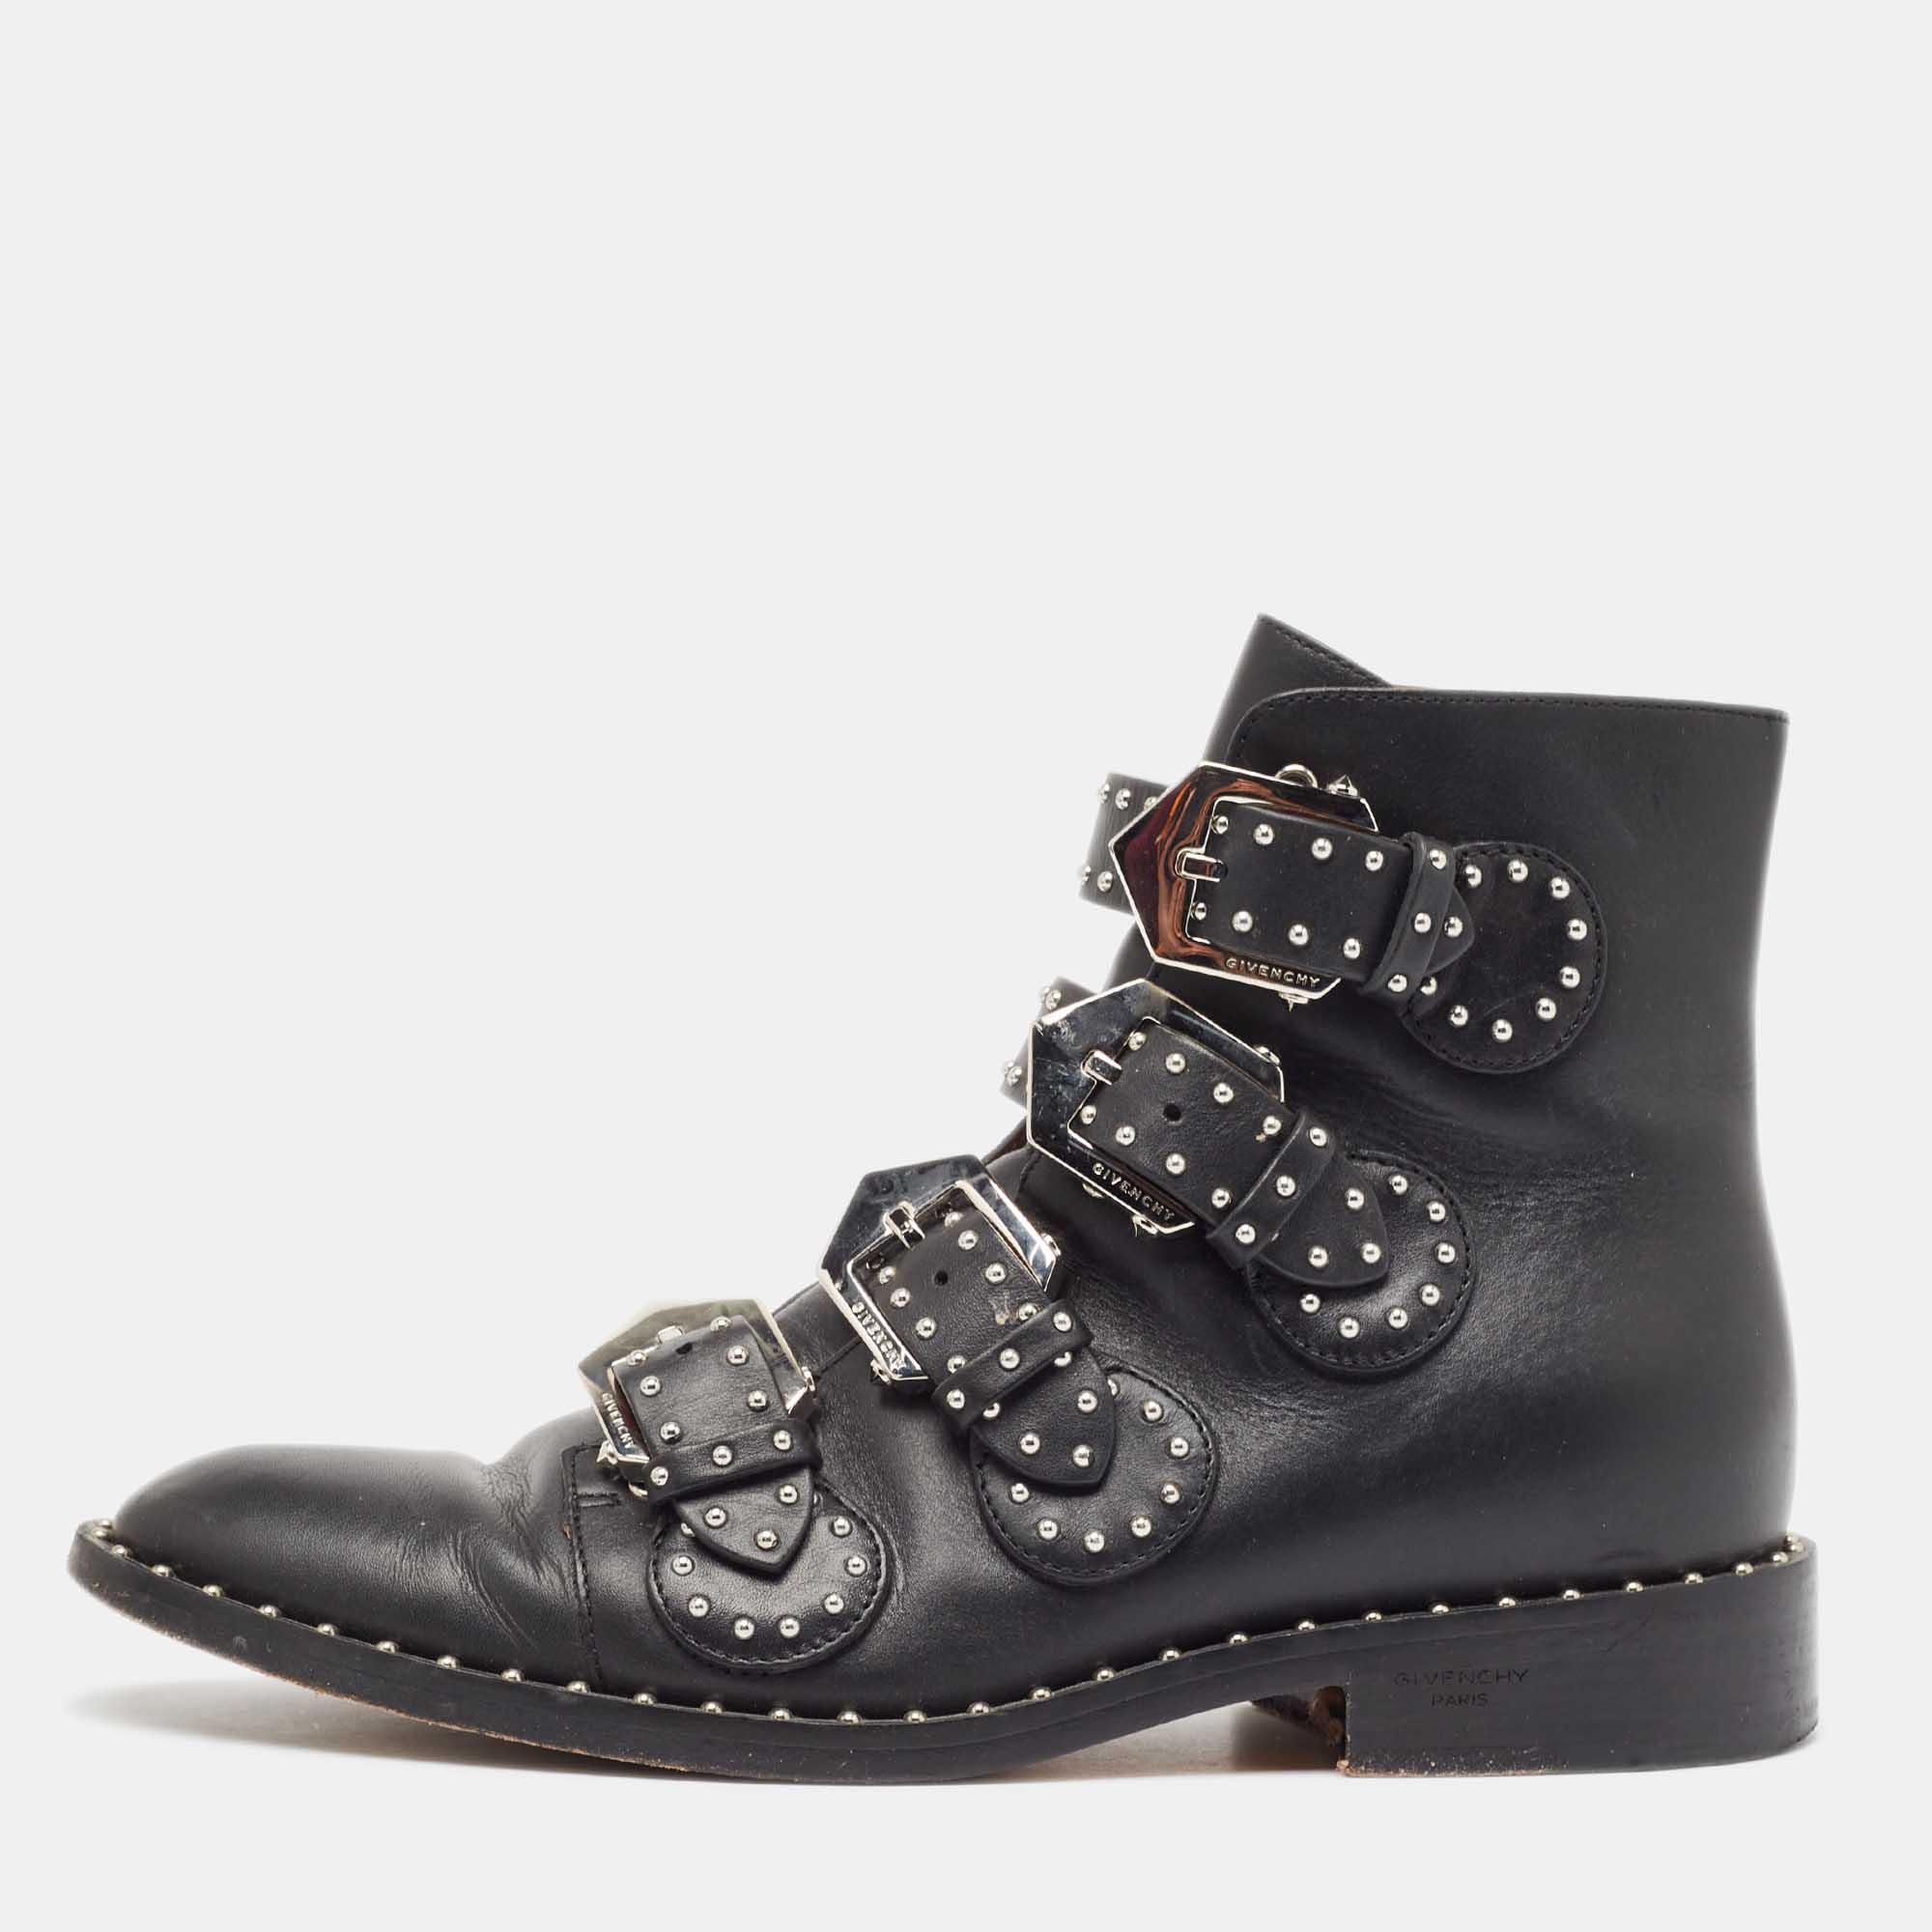 

Givenchy Black Leather Studded Buckle Detail Ankle Boots Size